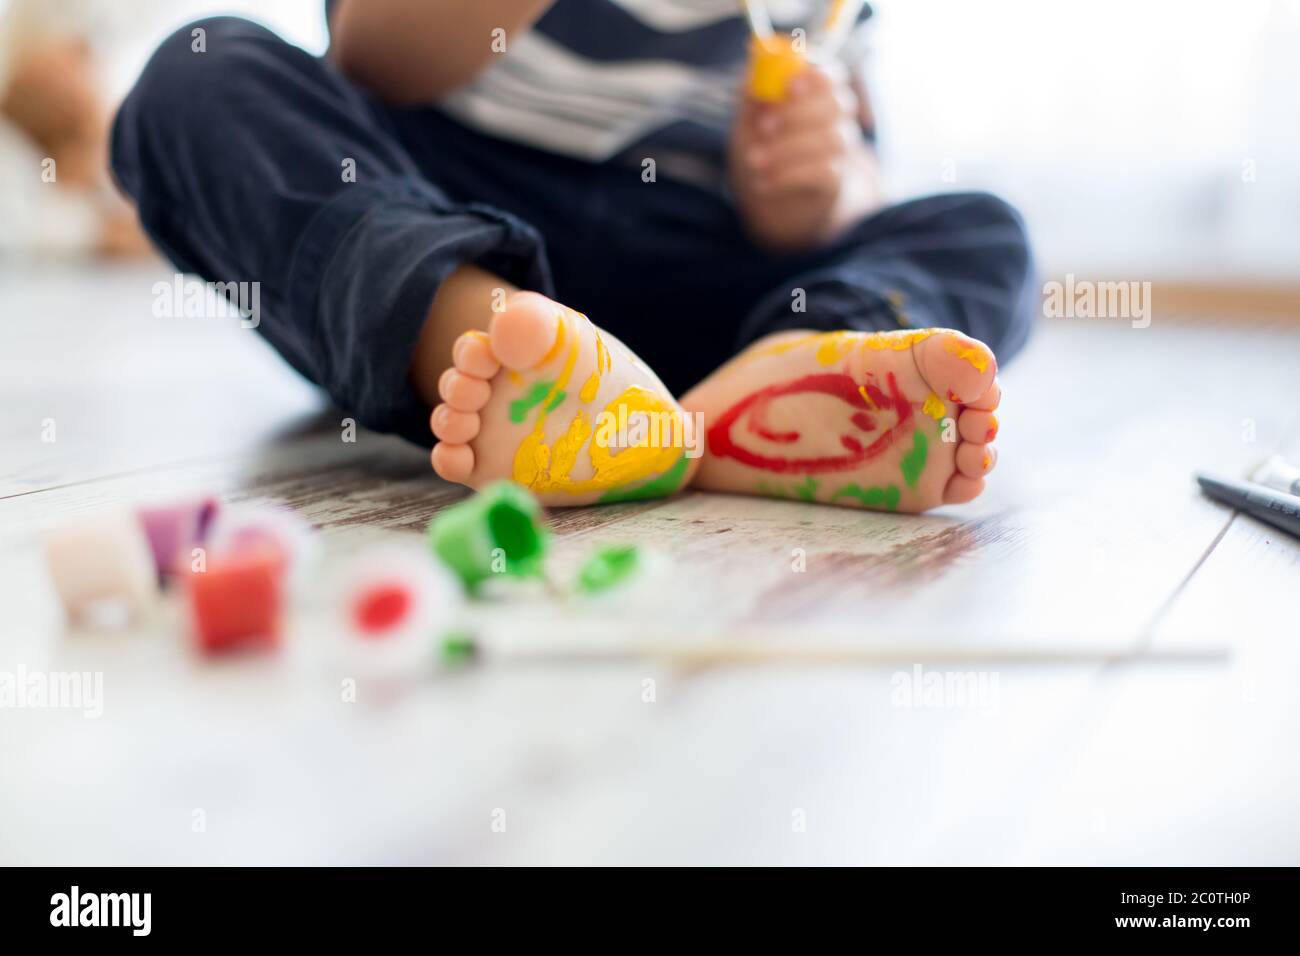 Brothers, playing at home, painting on their feet, tickling, laughing and smiling Stock Photo